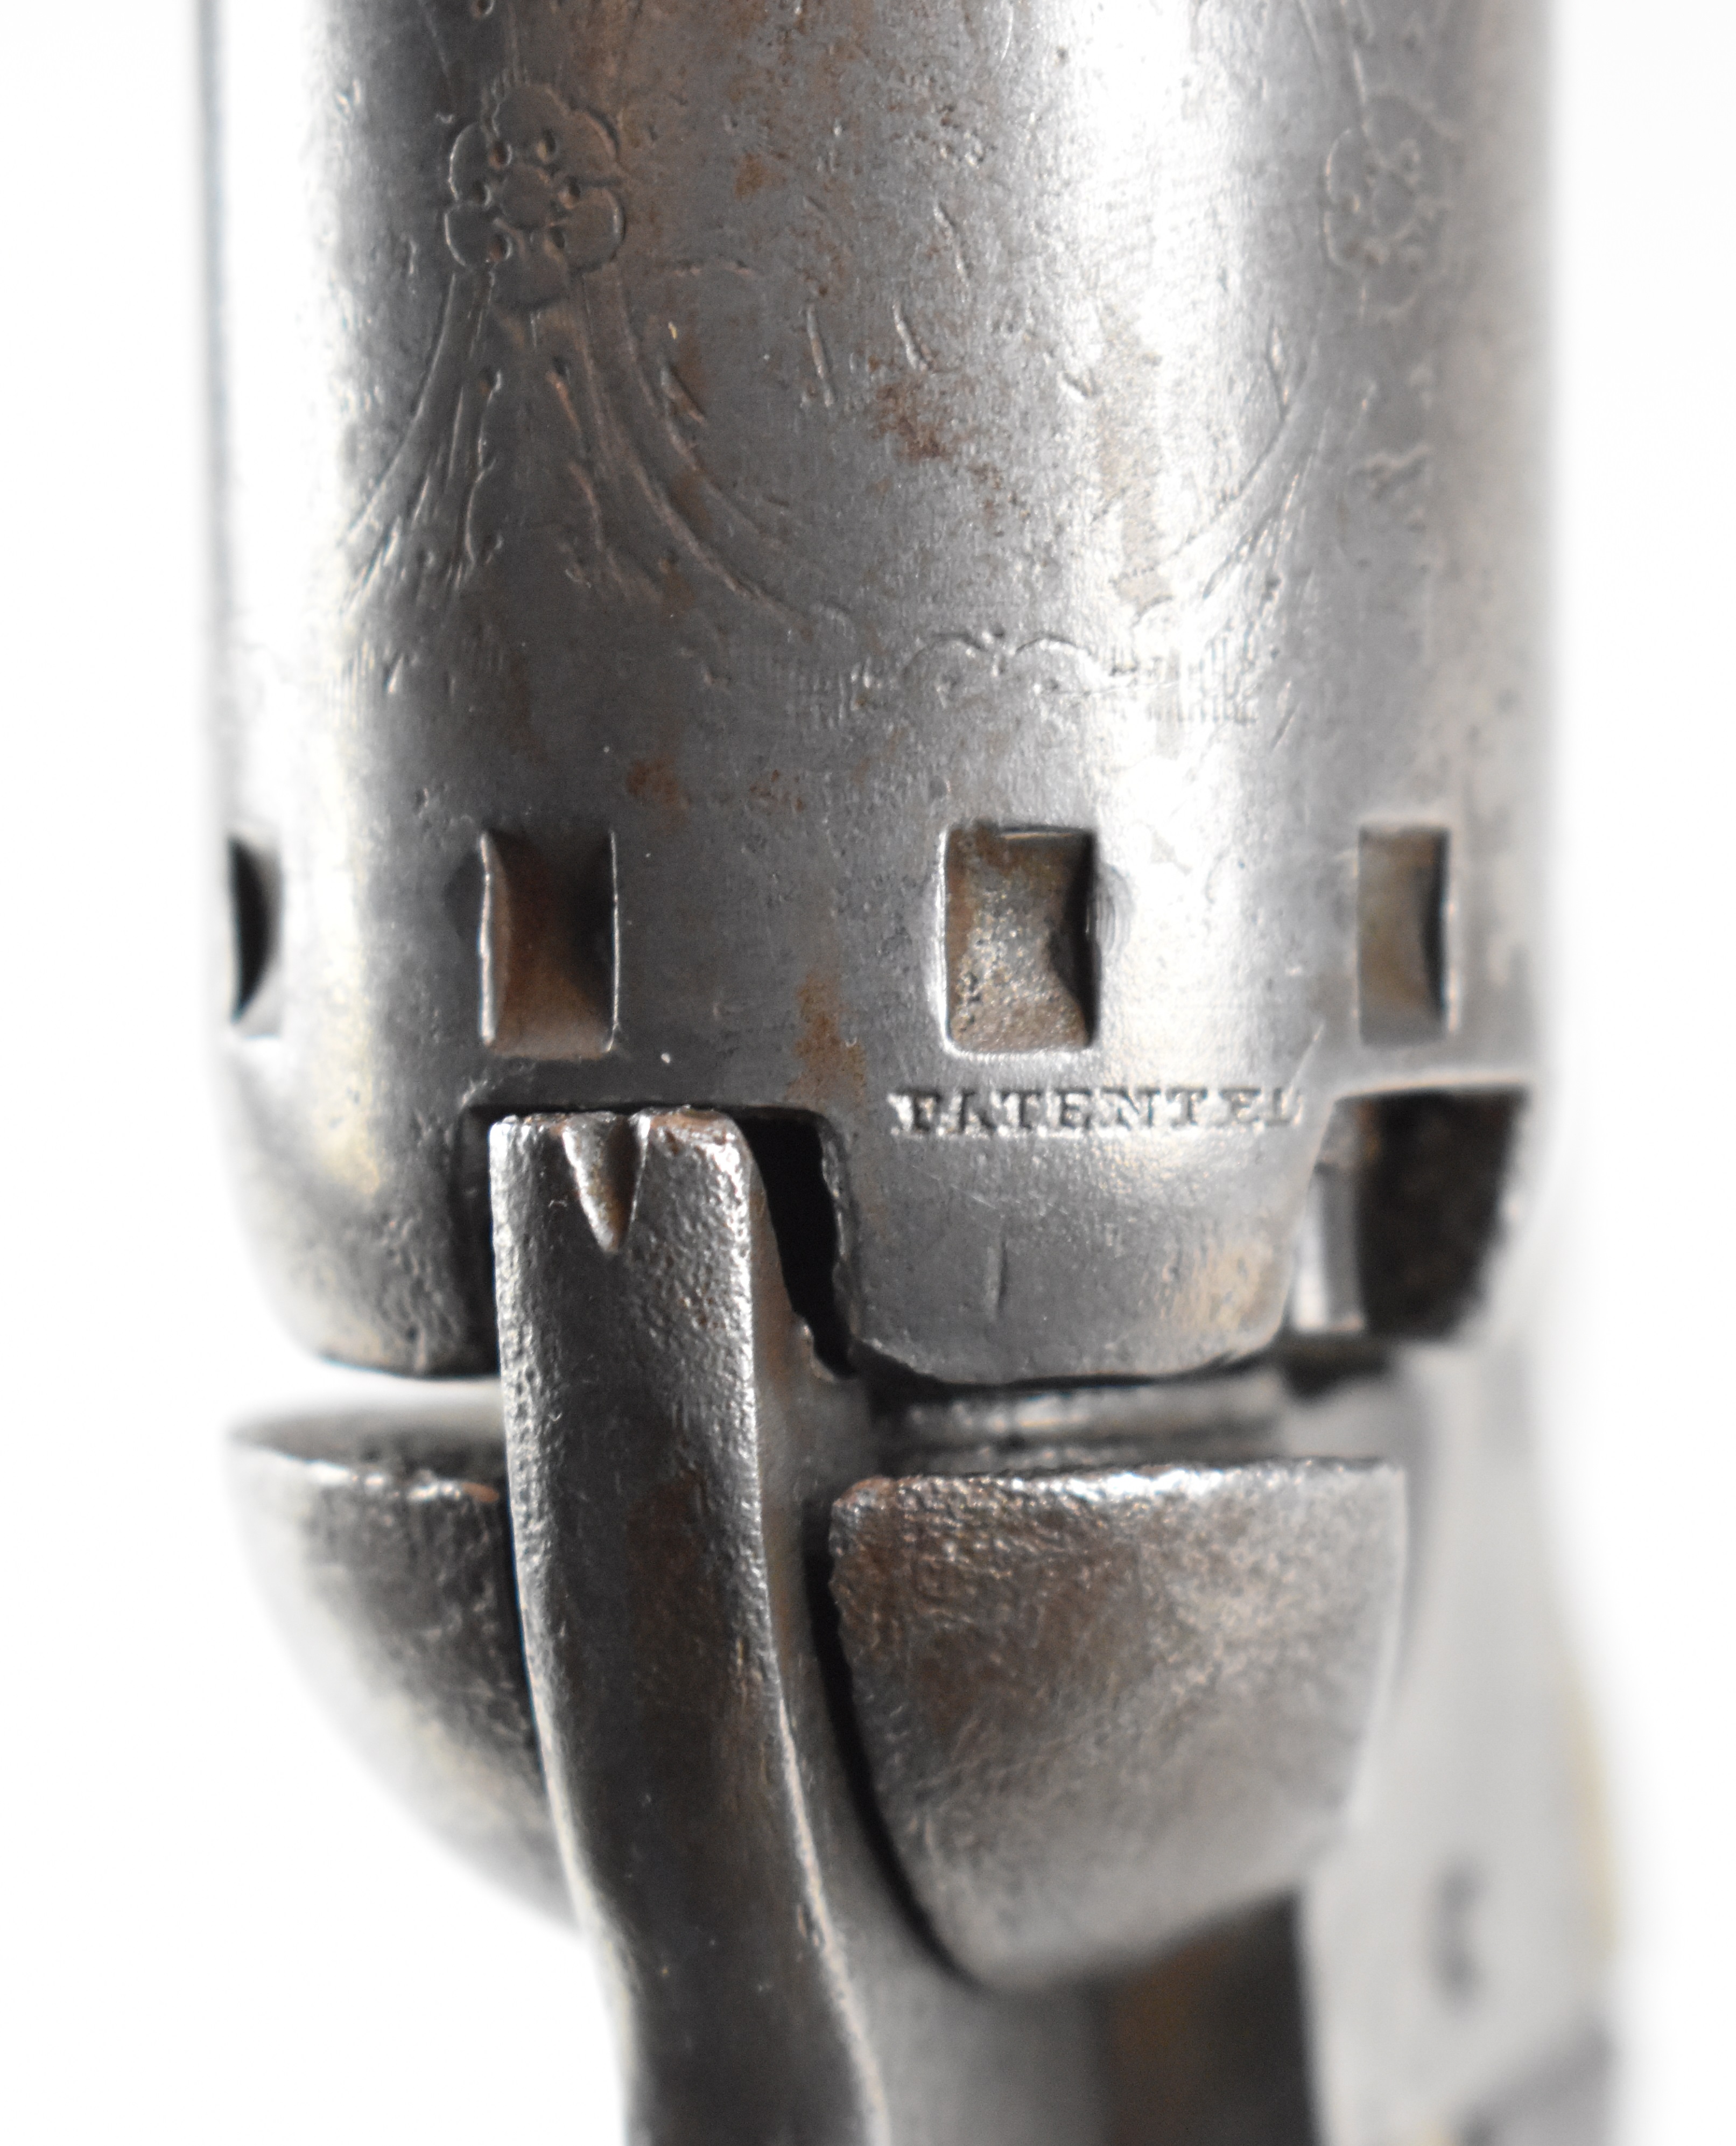 Manhattan Navy .36 five-shot single-action revolver with brass trigger guard and grip strap, - Image 20 of 20